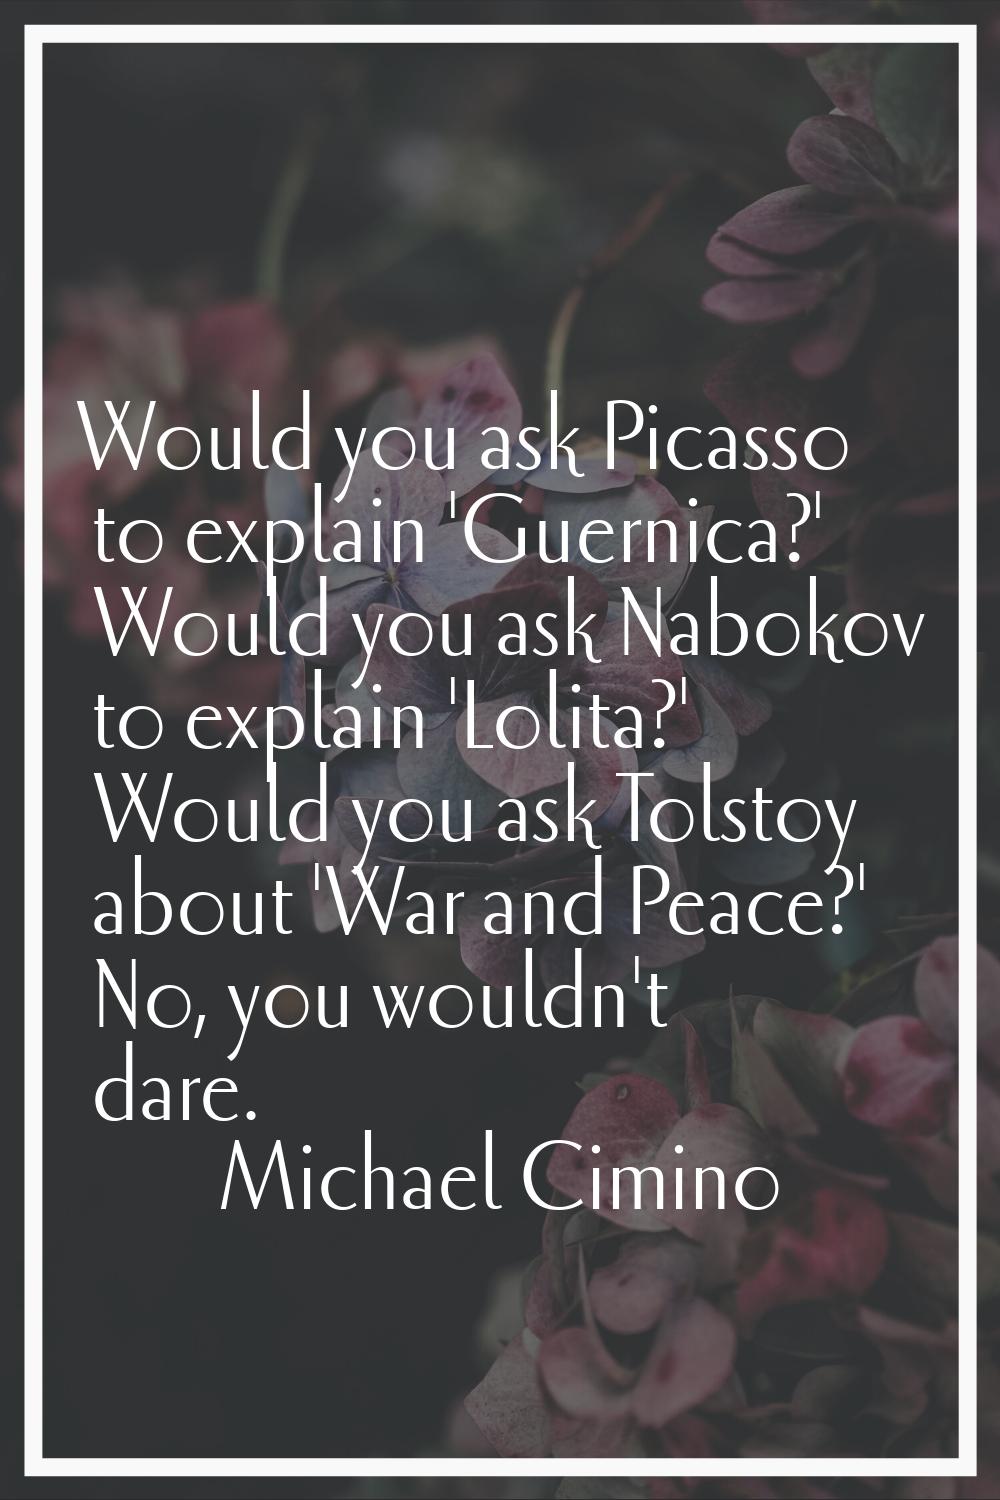 Would you ask Picasso to explain 'Guernica?' Would you ask Nabokov to explain 'Lolita?' Would you a